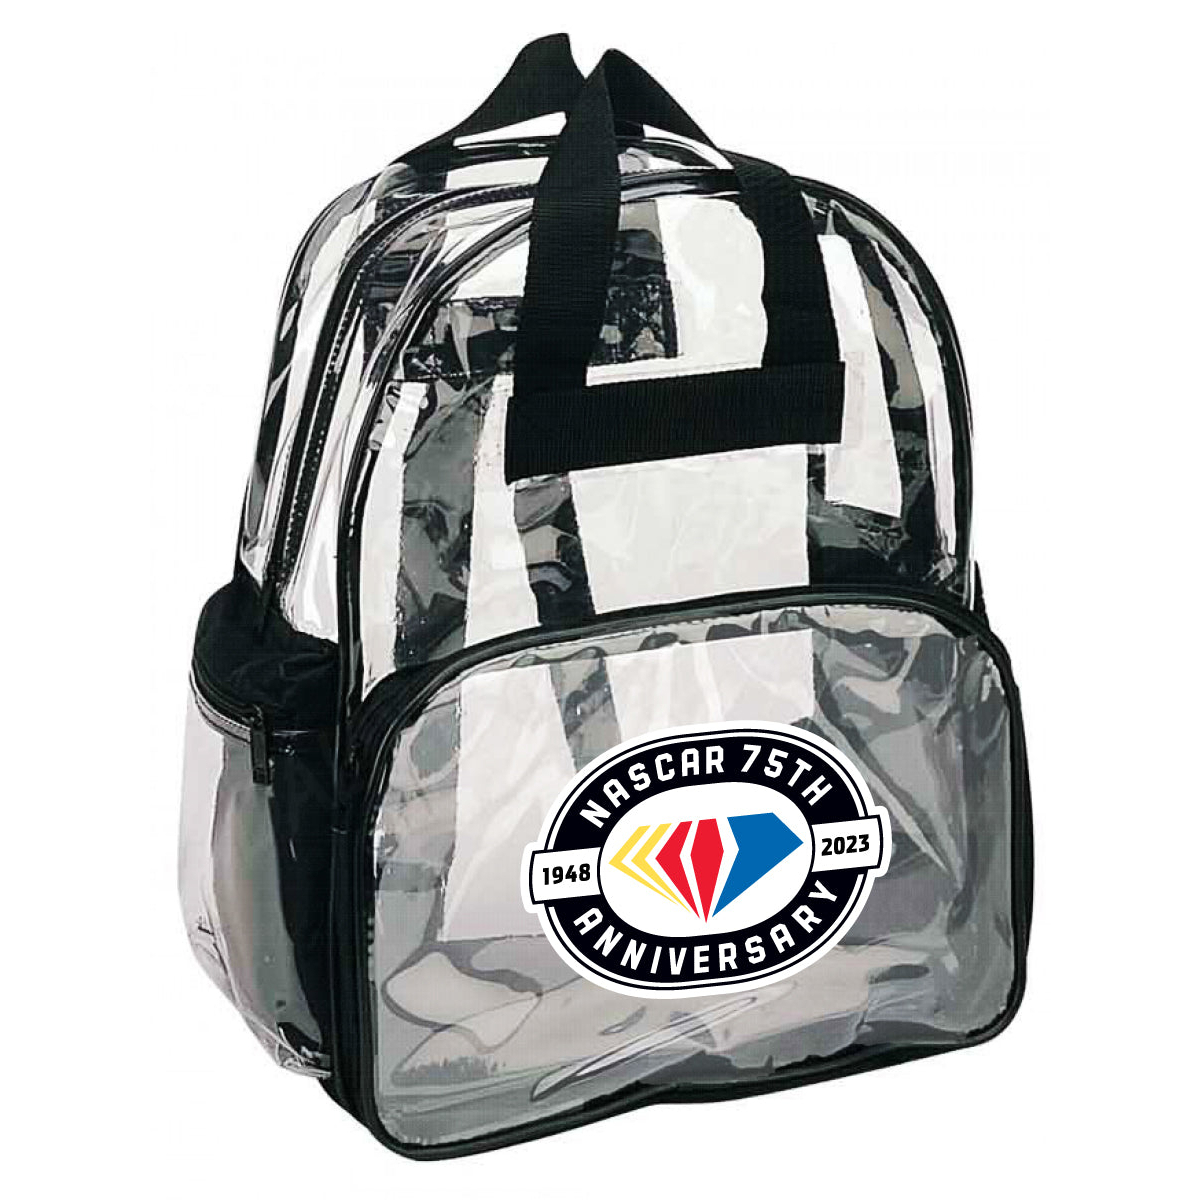 NASCAR 75 Year Anniversary Officially Licensed Clear Backpack